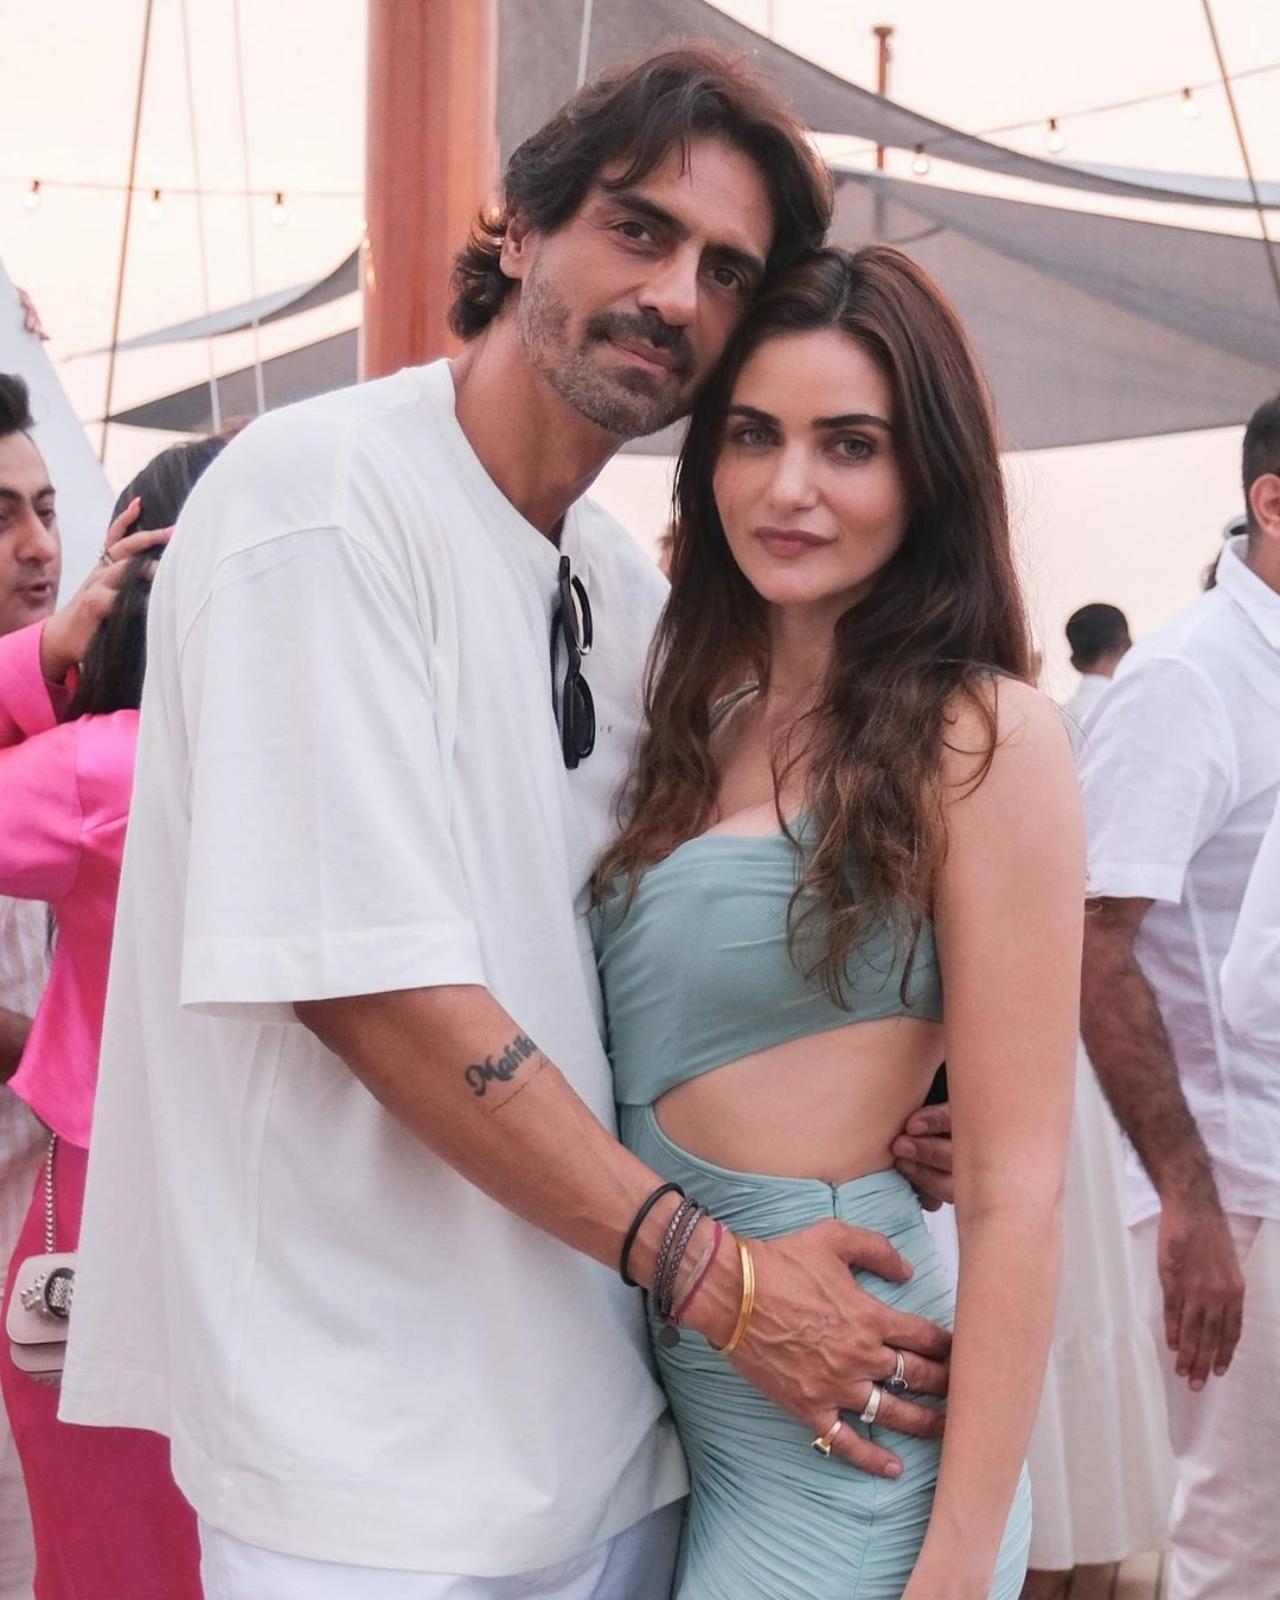 Gabriella and Arjun make for a stunning couple in this picture. While Arjun opted for a white Tee, Gabriella went for pastel blue dress with cut-outs near her midriff